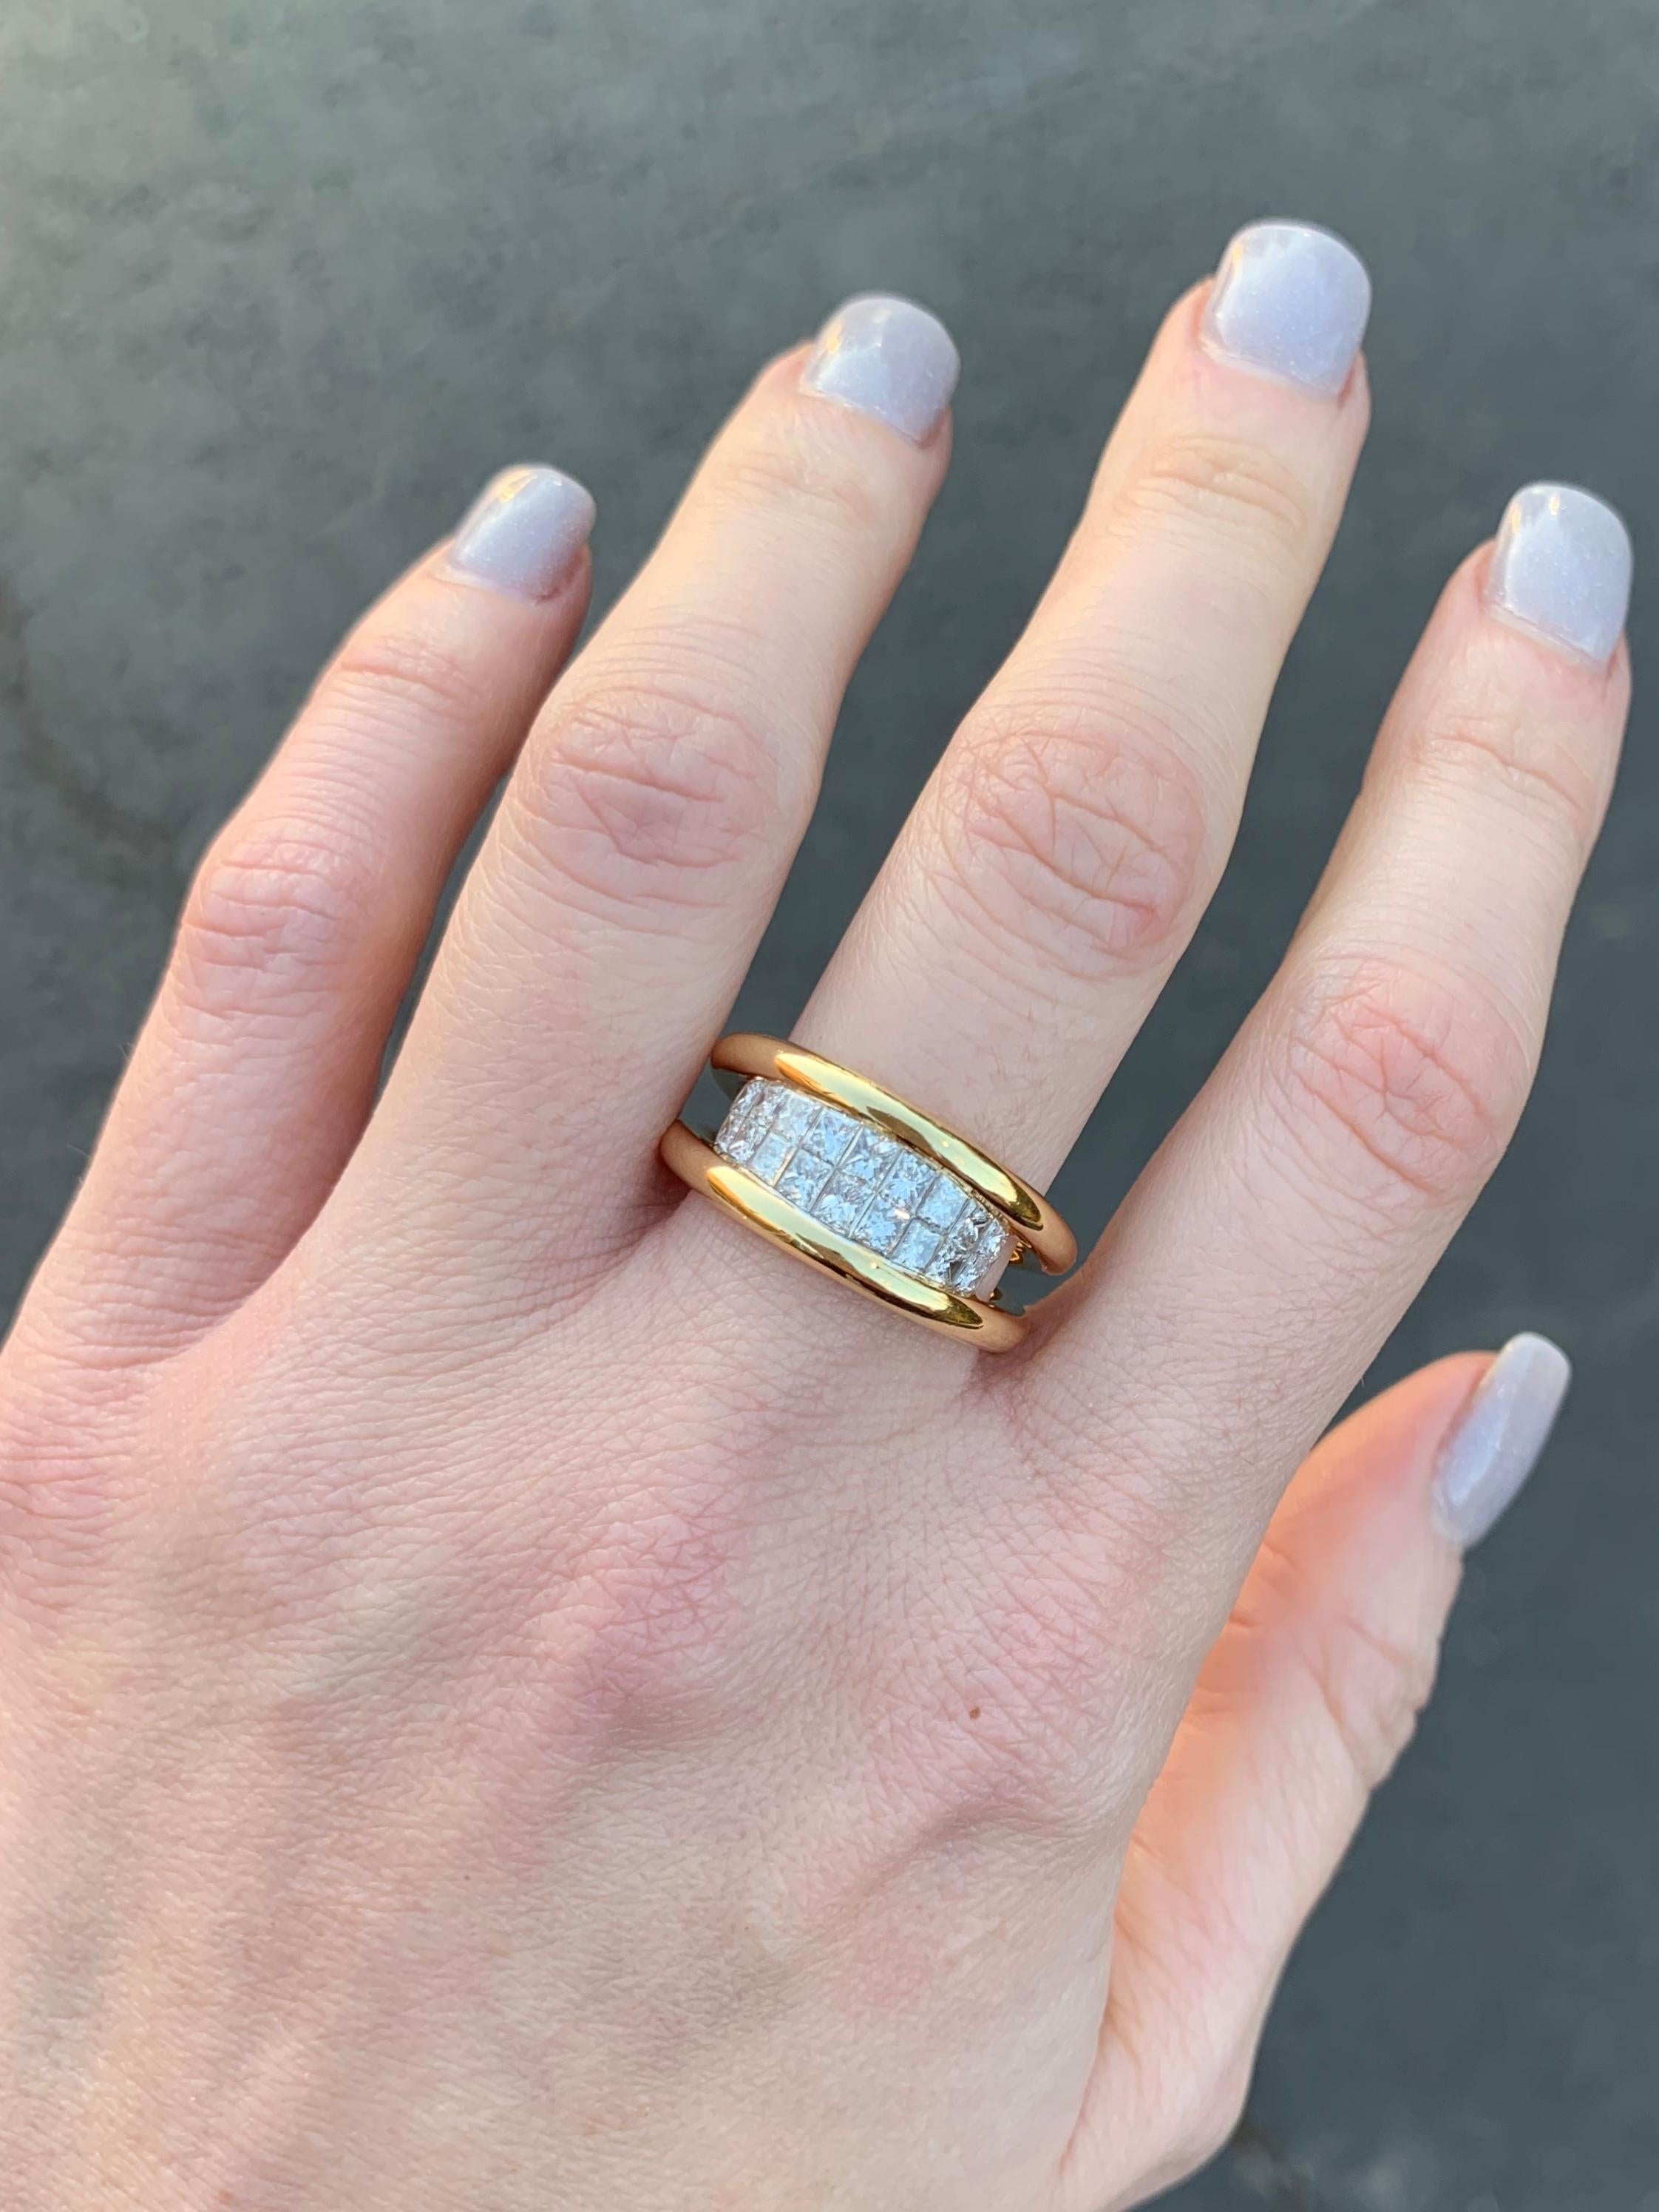 A very well made polished 18k yellow gold double shank modern ring featuring a center section of expertly invisibly set high quality princess cut diamonds. 18 Princess cut diamonds have a total weight of 1.02 carats at approximately G color, VS2-SI1